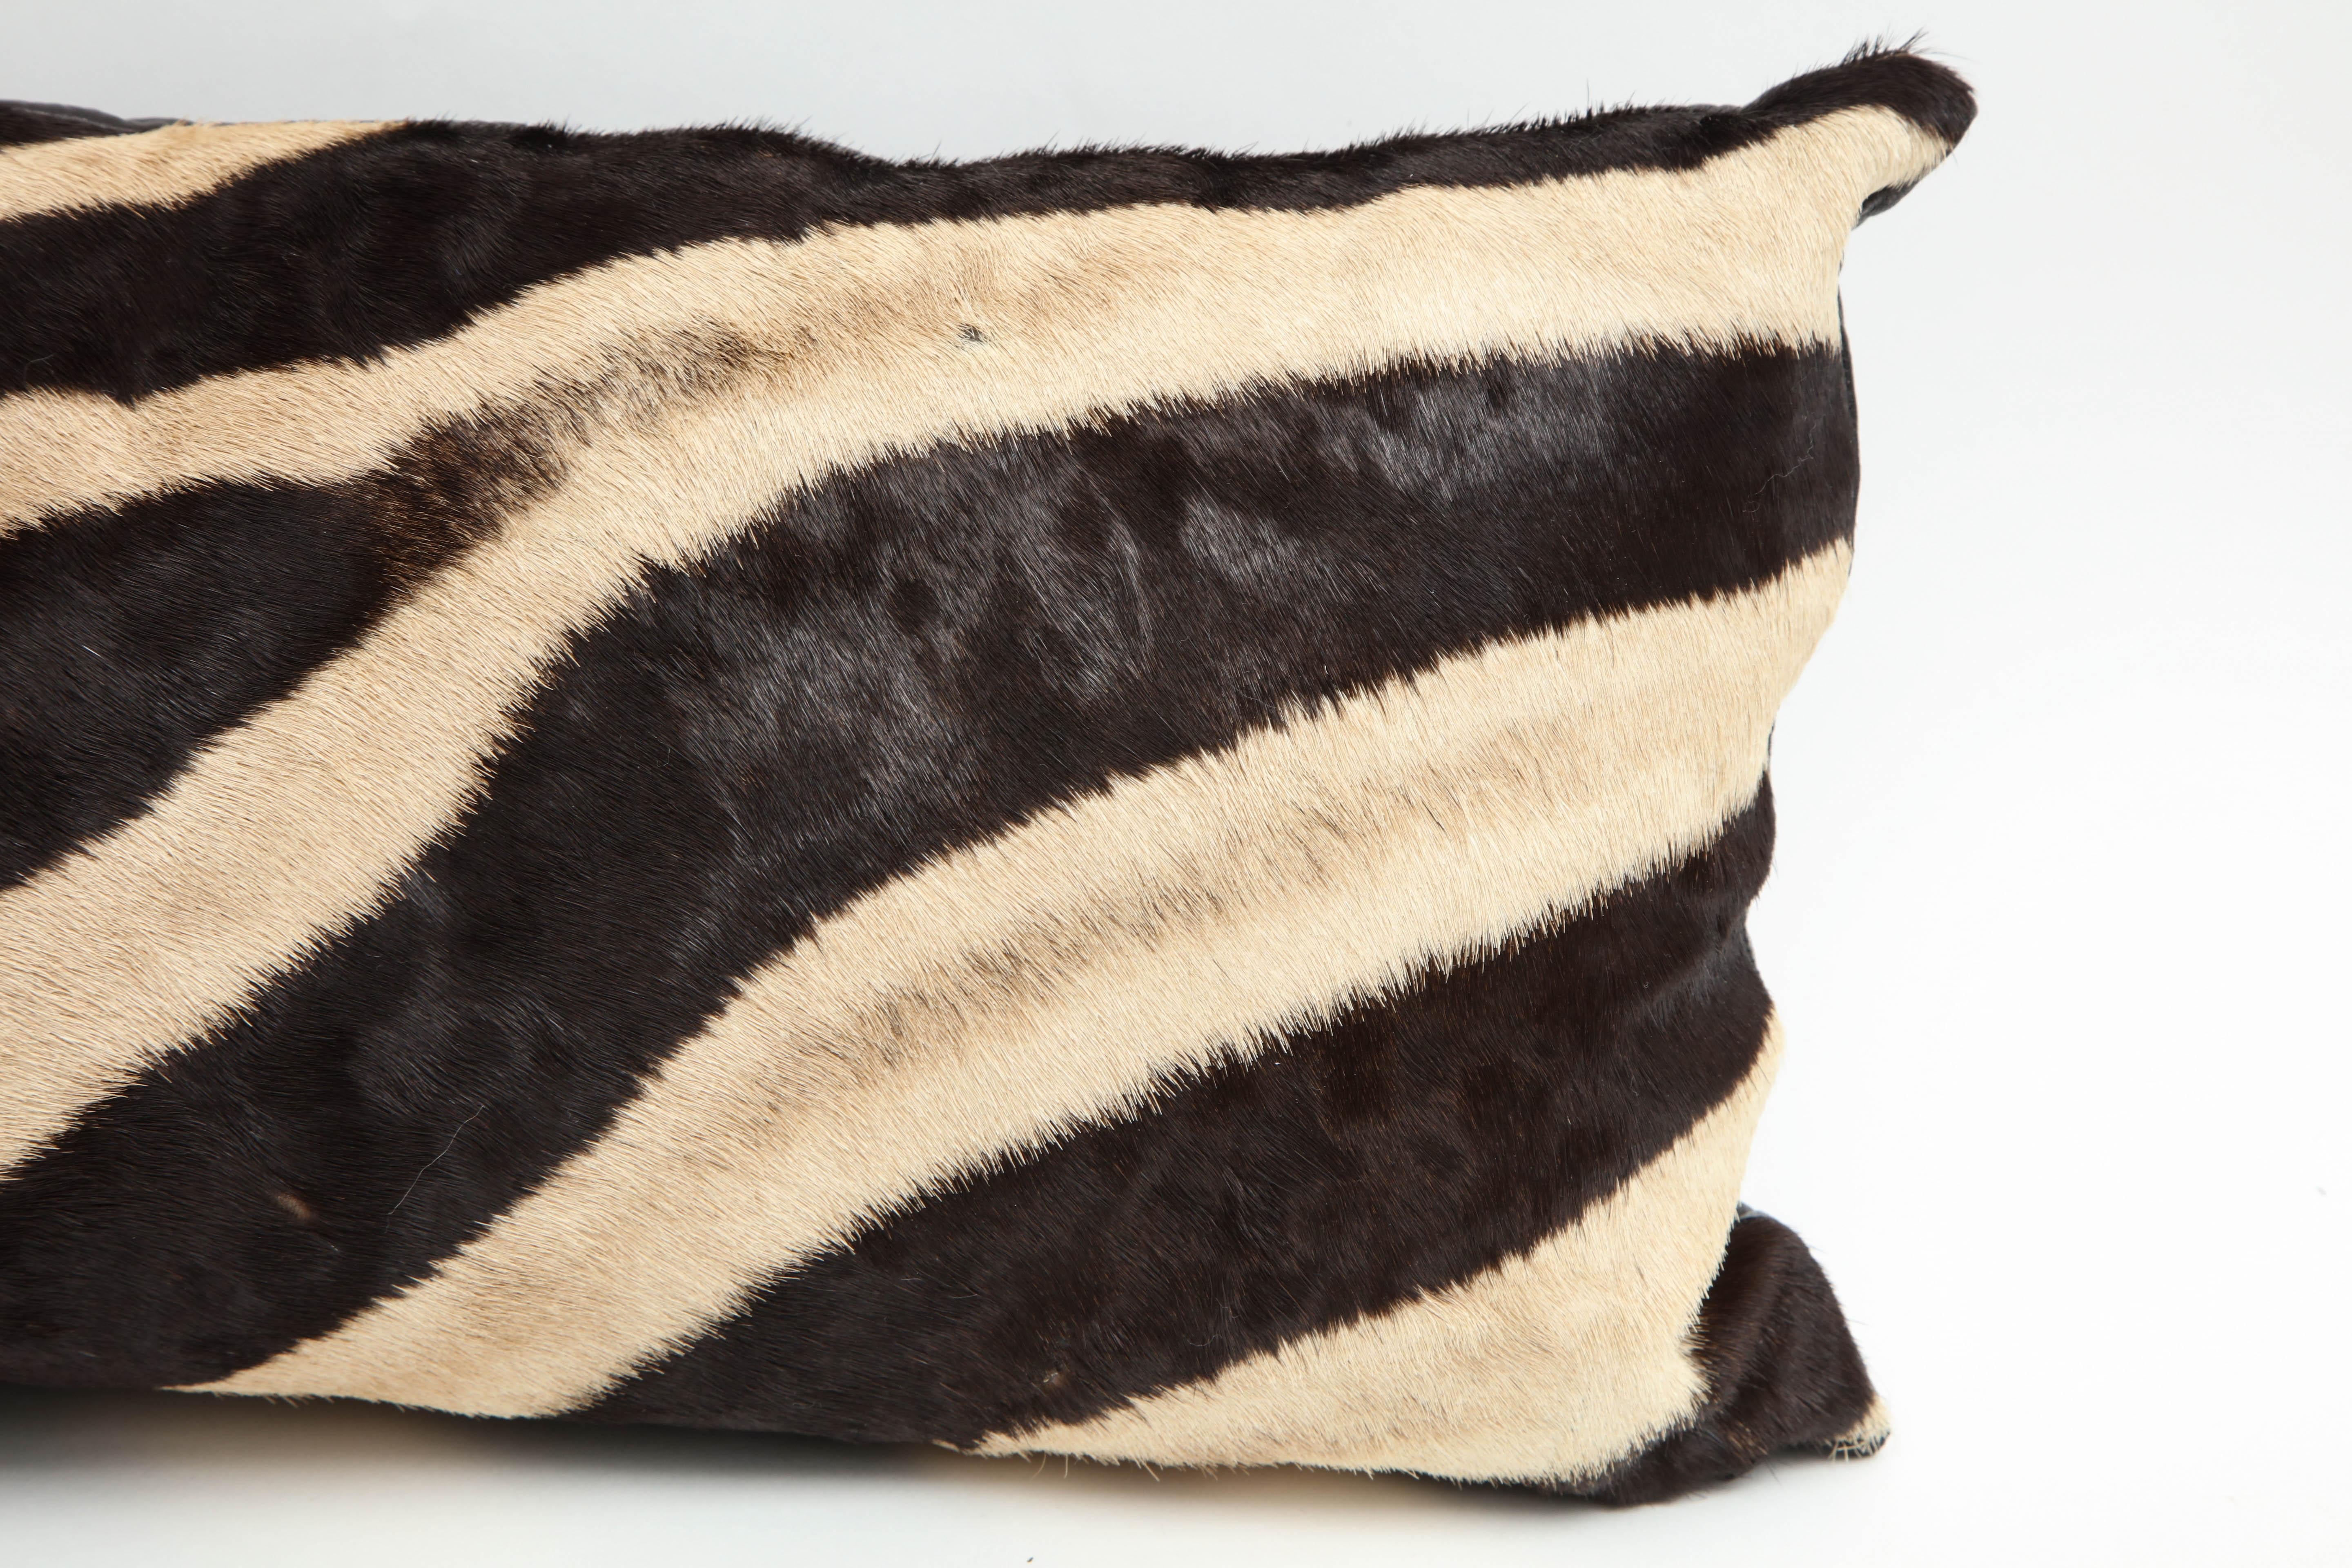 Hand-Crafted Pillow, Zebra Hide, Chocolate Brown Zebra Hide with Leather Backing, in Stock